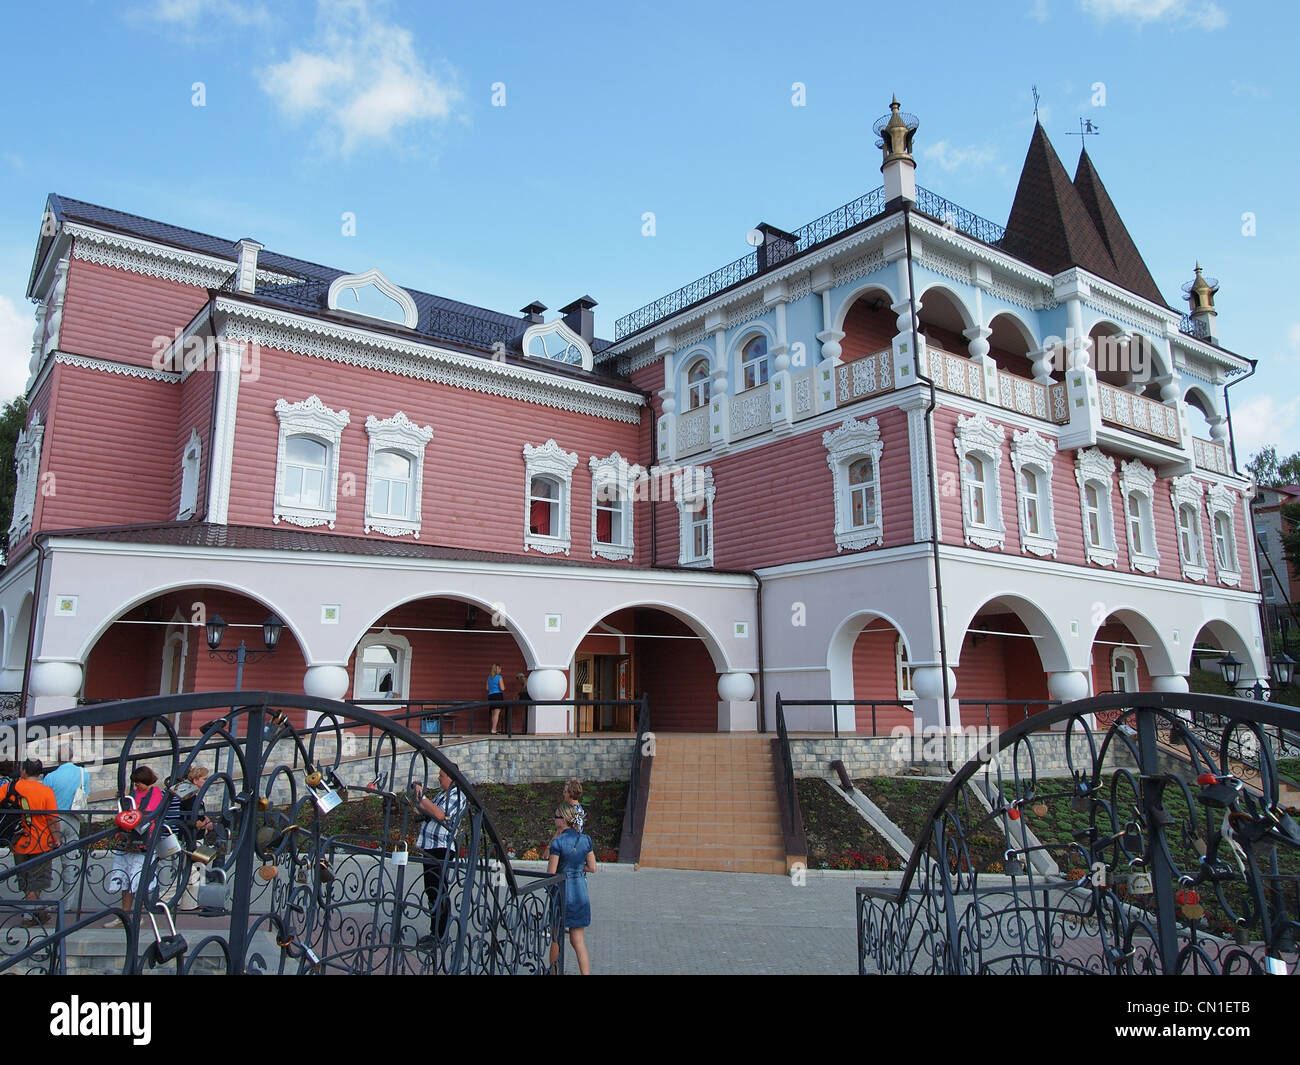 The Palace of Mice (or Mice Palace) in Myshkin, the City of Mice at the River Volga, Russia Stock Photo